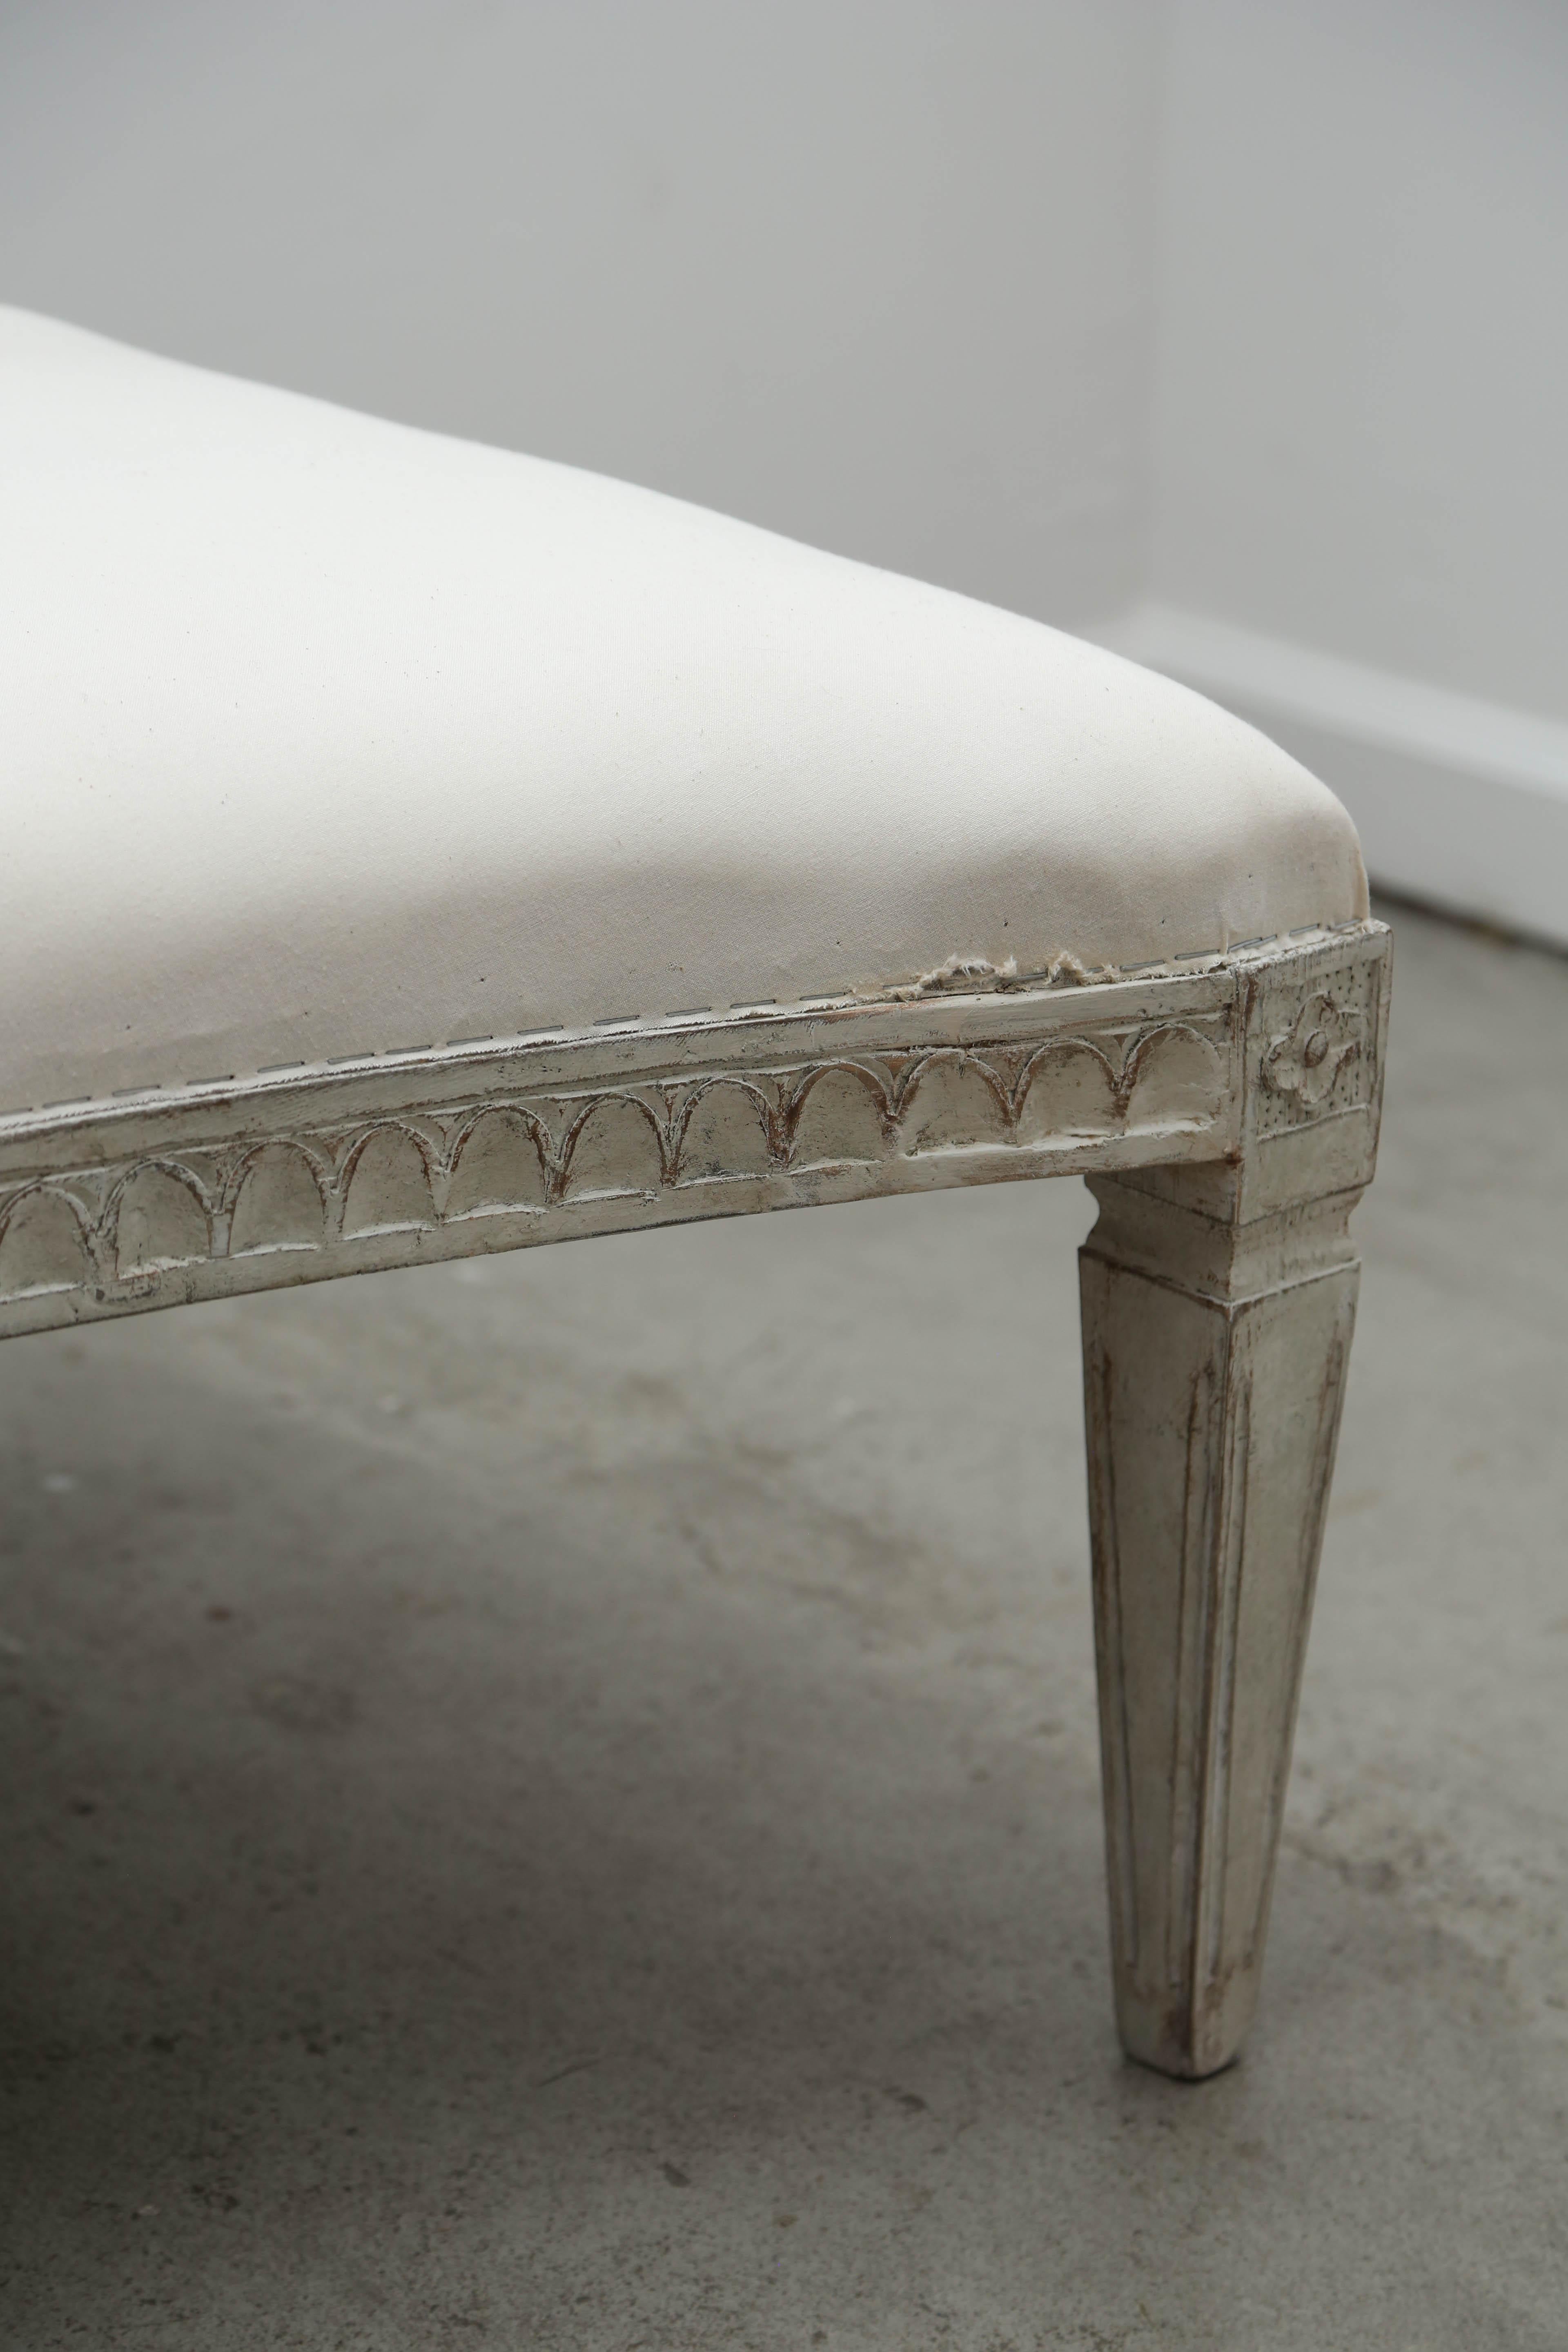 Antique Swedish Gustavian style distress painted curved bench in Swedish Gustavian white/greyish paint finish.
The border is carved with lamb tongue detail with a rosette carved at the top of each fluted leg.
Bench has a lovely graceful curved